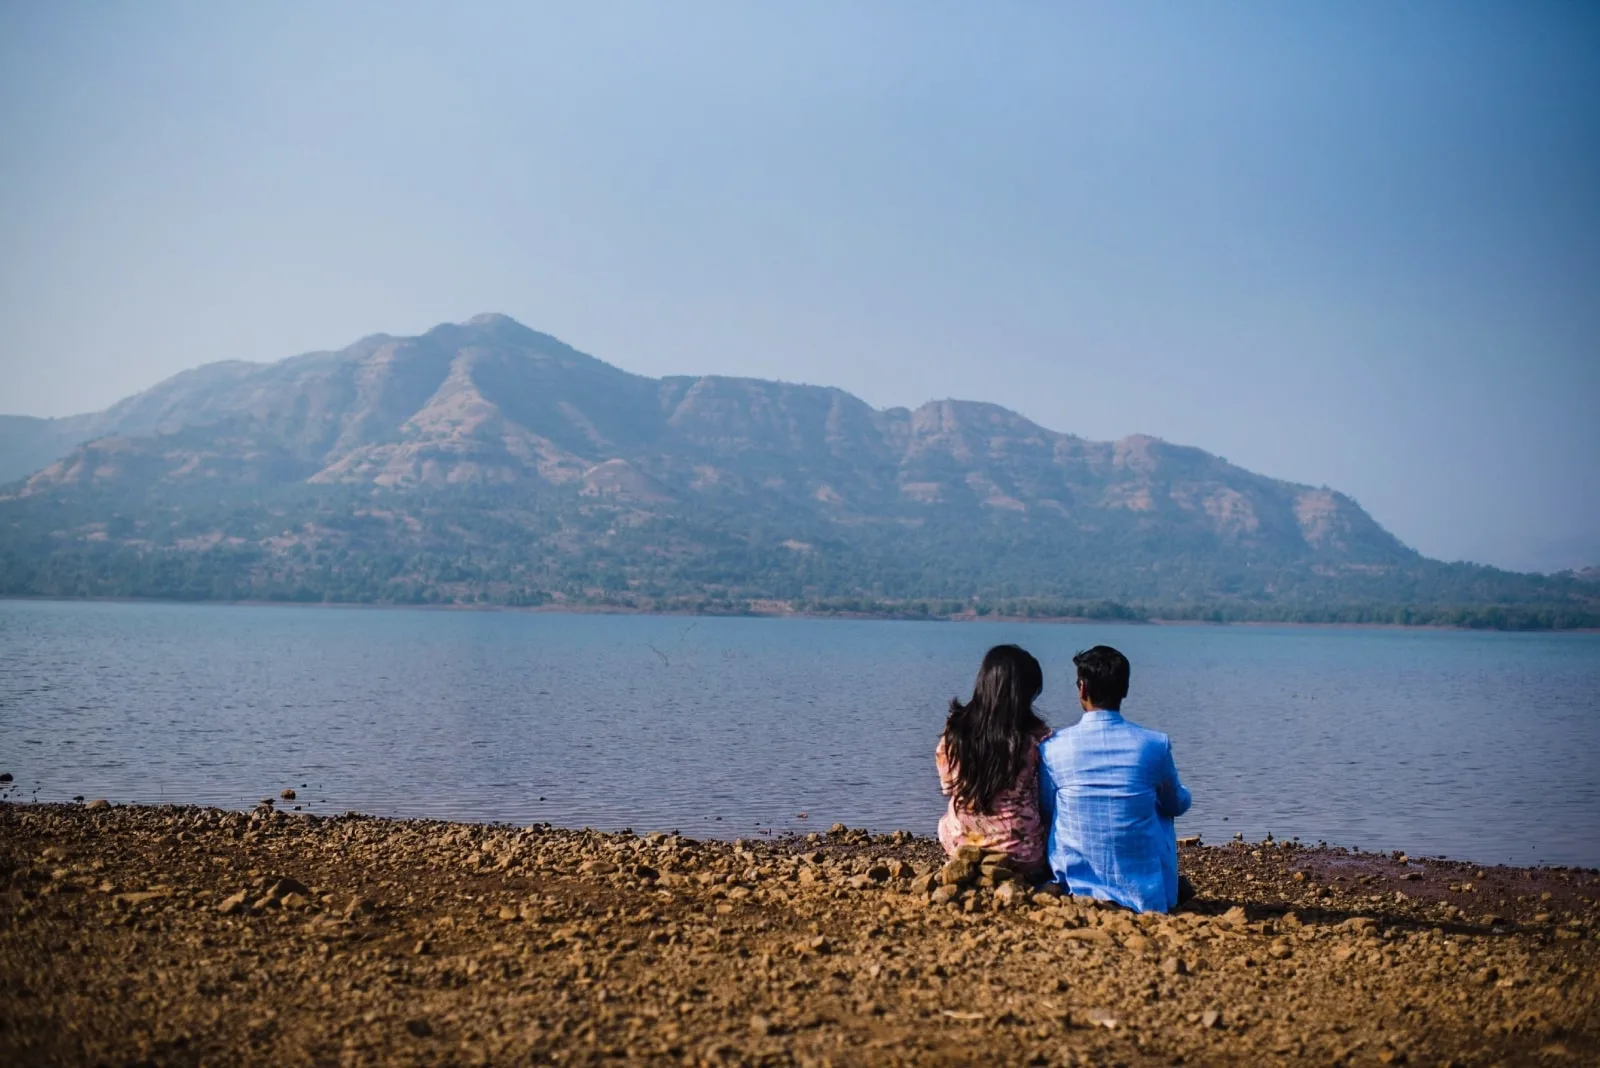 man in blue shirt and woman sitting near water